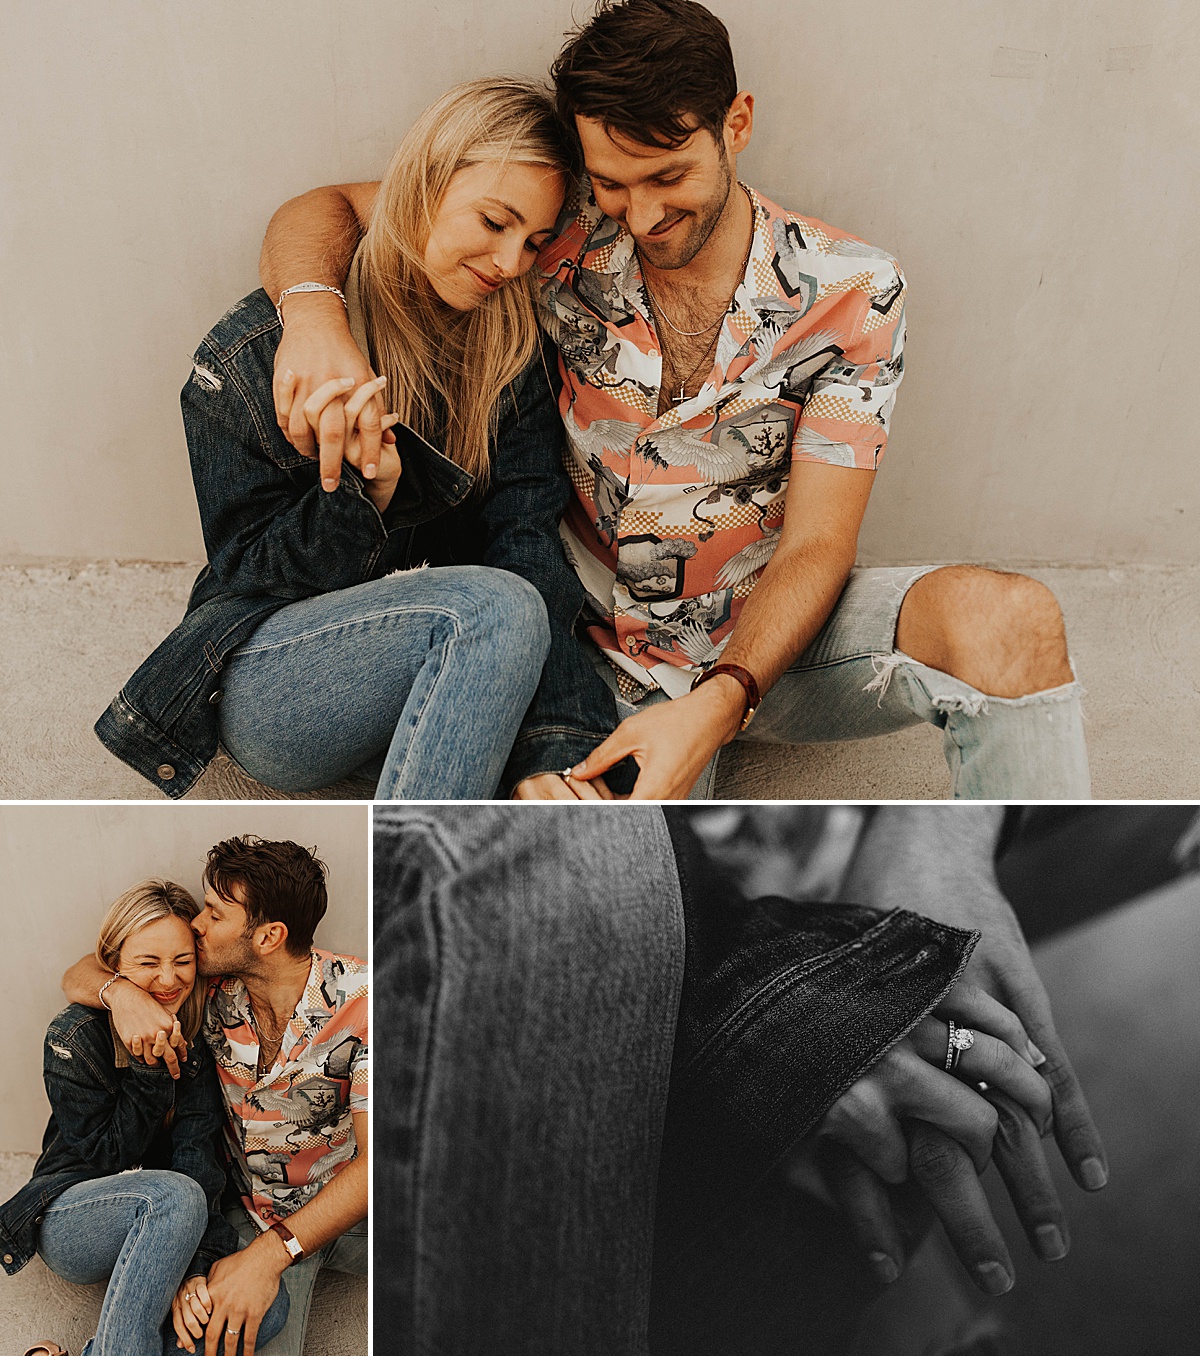 Fun and playful engagement photos in downtown LA.